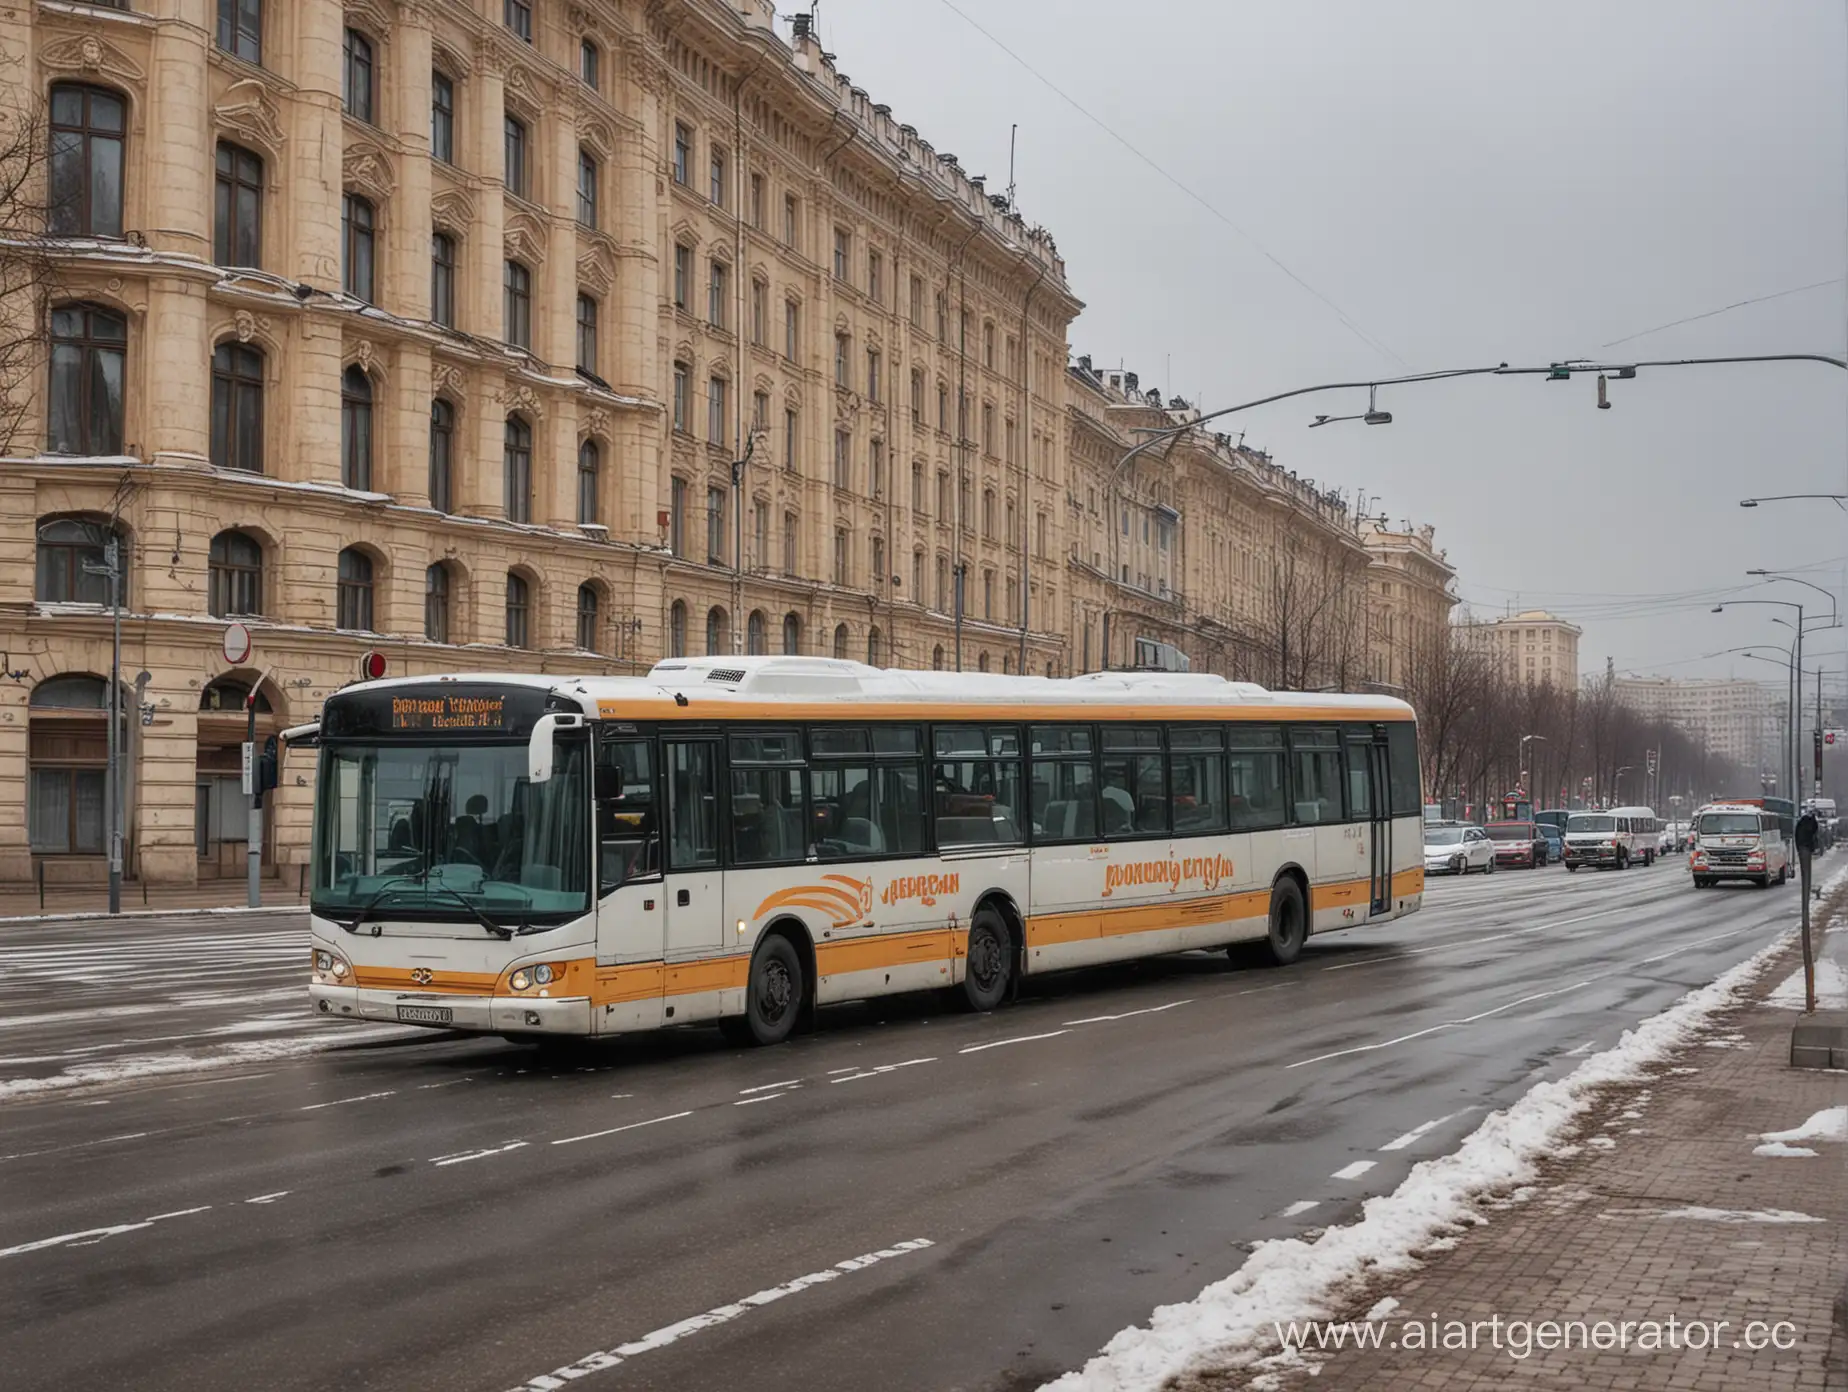 Colorful-Bus-Driving-Through-Vibrant-Streets-of-a-Russian-City